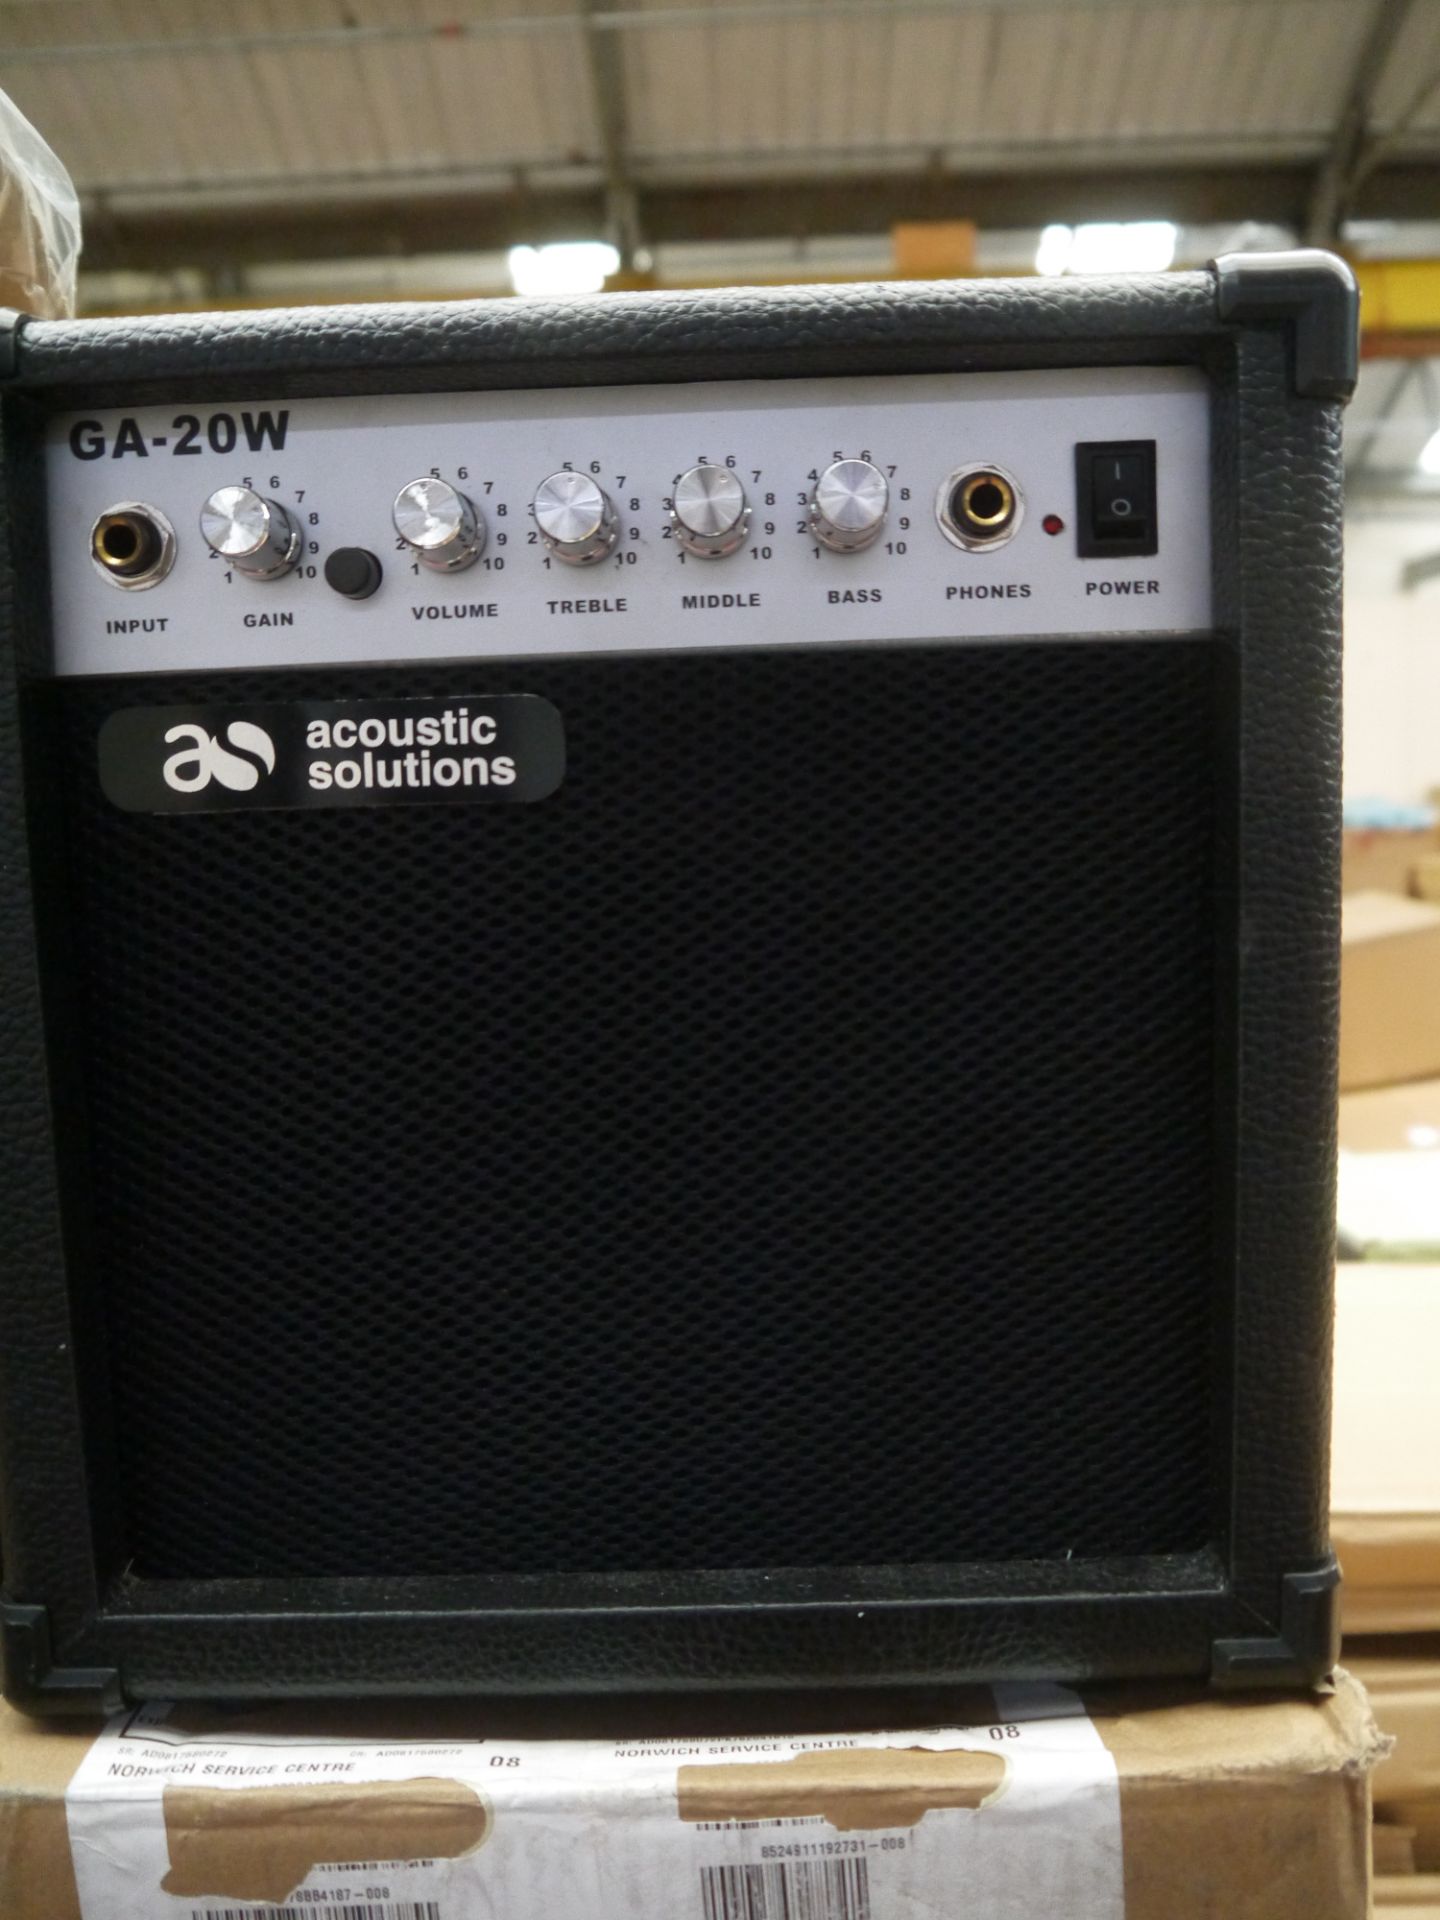 Acoustic Solutions Guitar amplifier, GA-20W 20w Output, Overdrive Boost Function & Headphone.